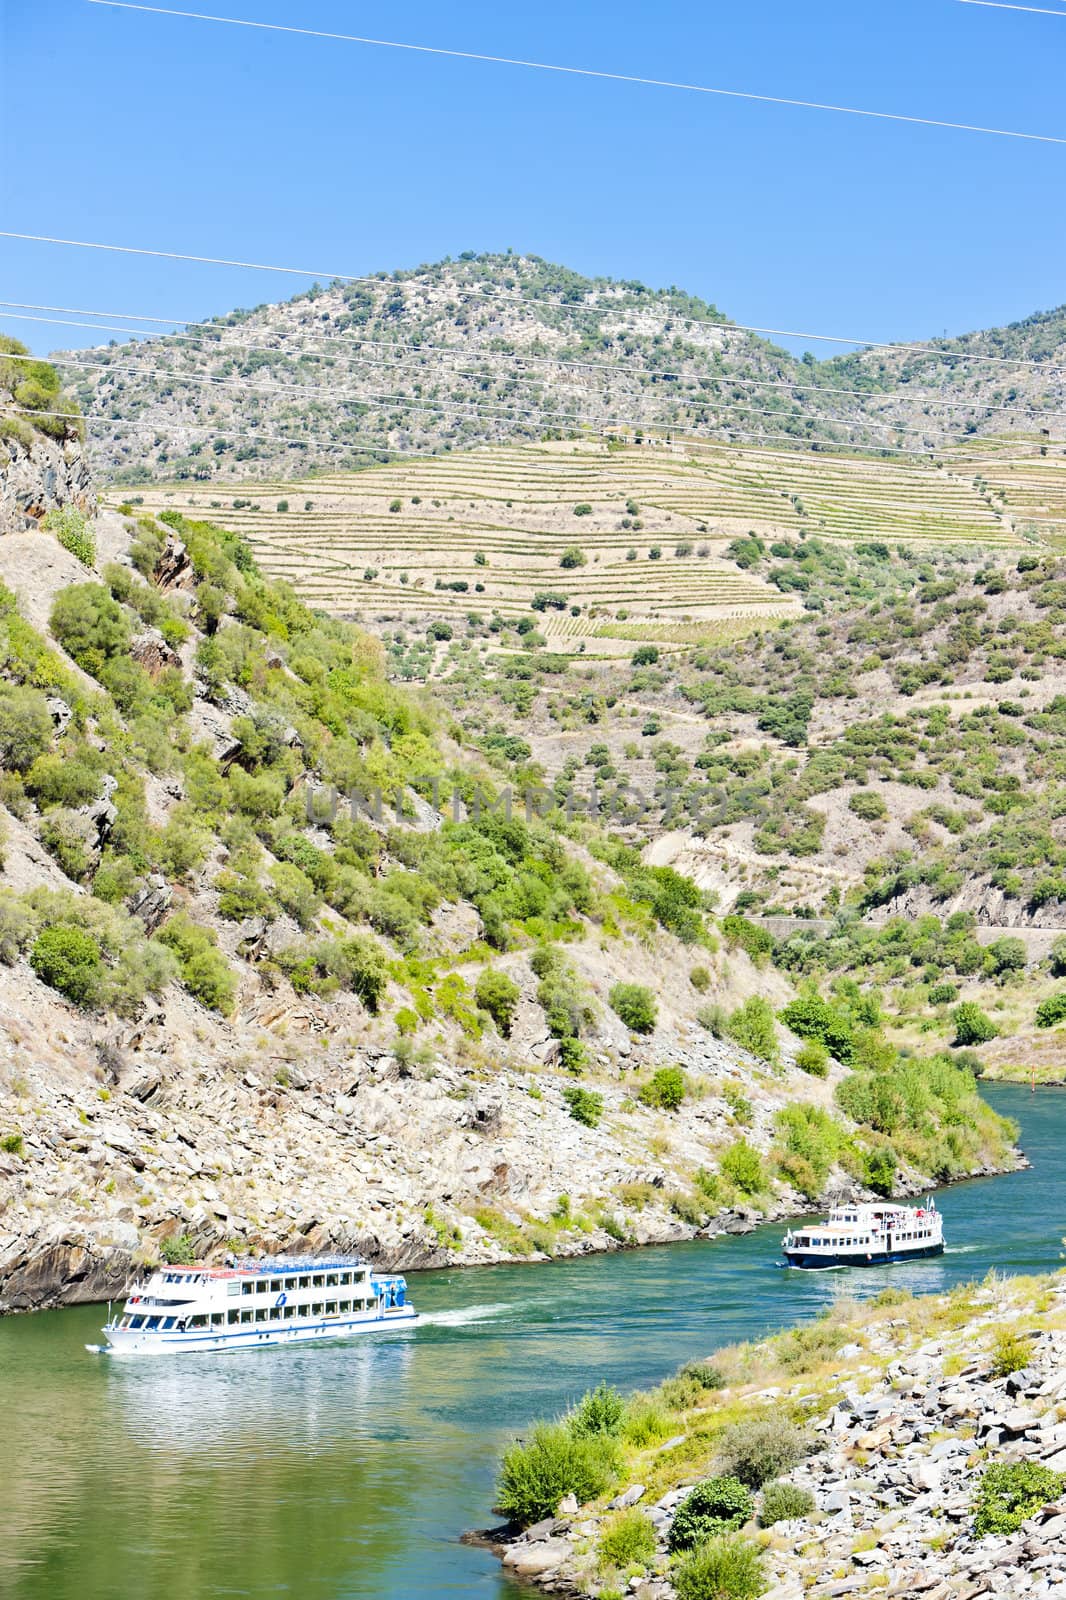 cruise ships in Douro Valley, Portugal by phbcz